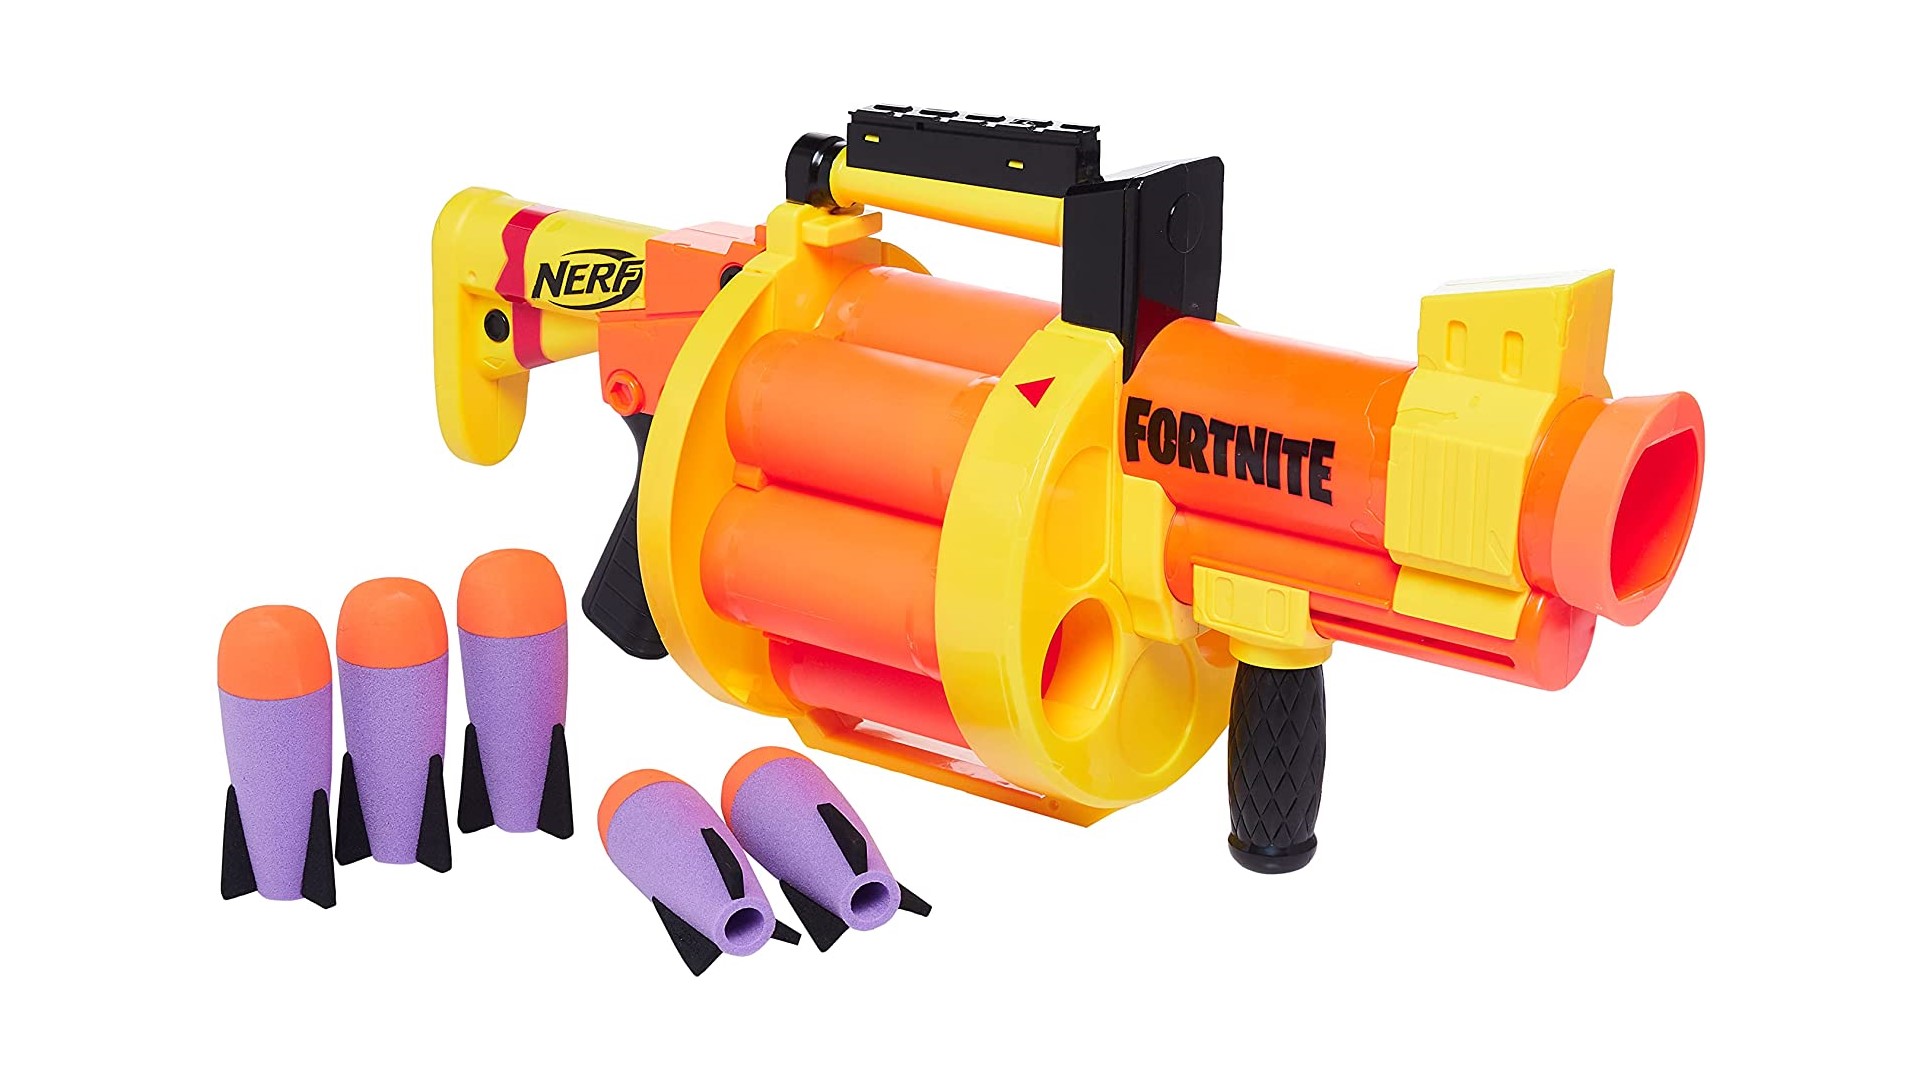 A GL nerf gun Fortnite toy with ammo